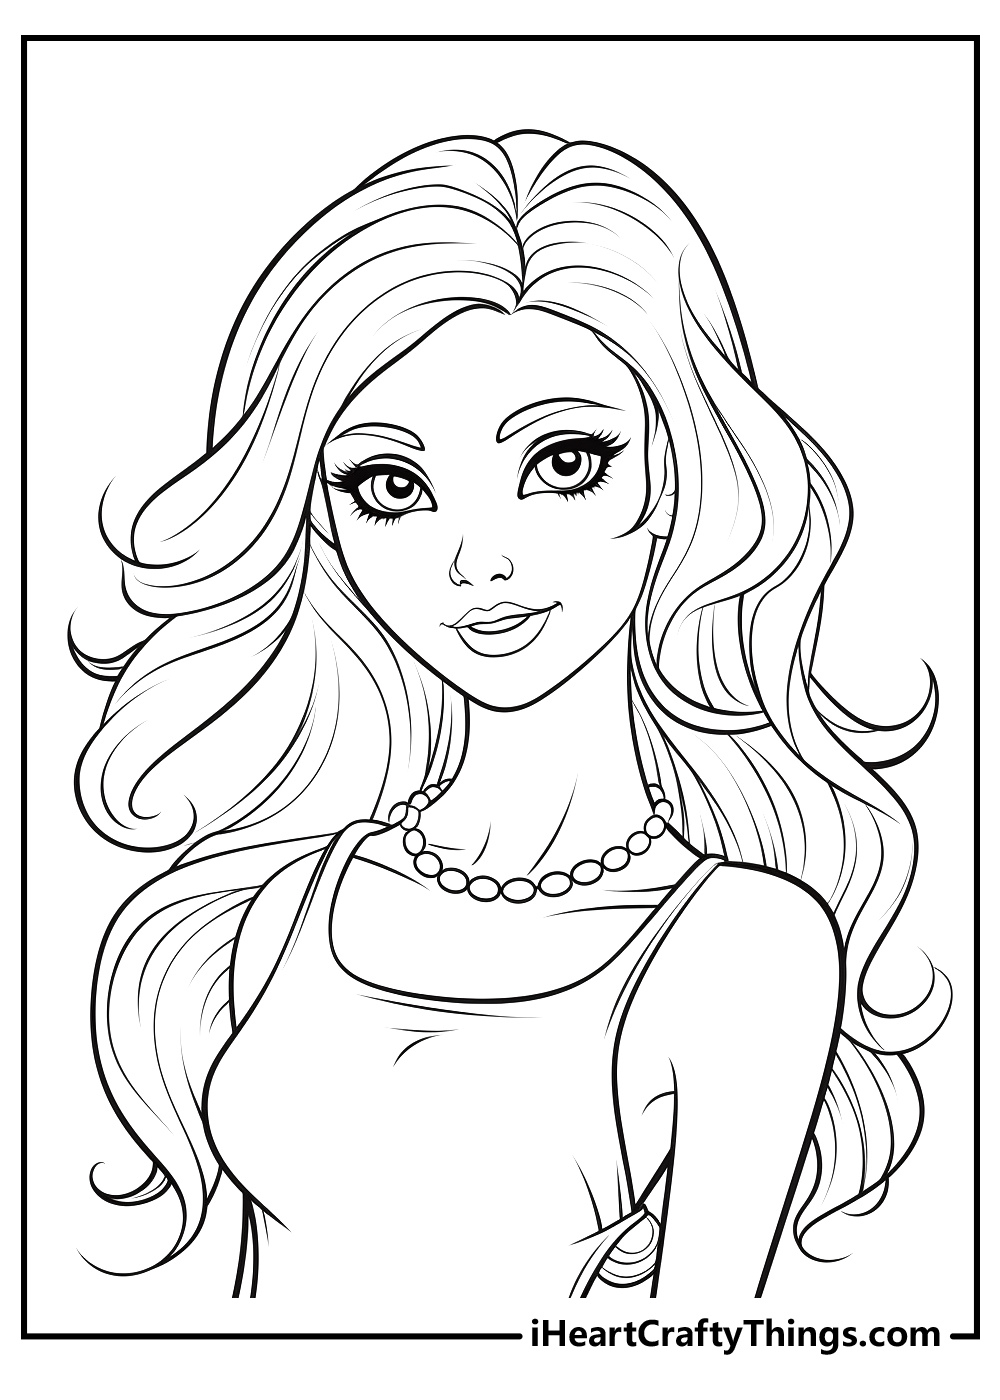 60 Black Girls Coloring Pages - Black Woman Coloring Pages by WAFA CREATIONS